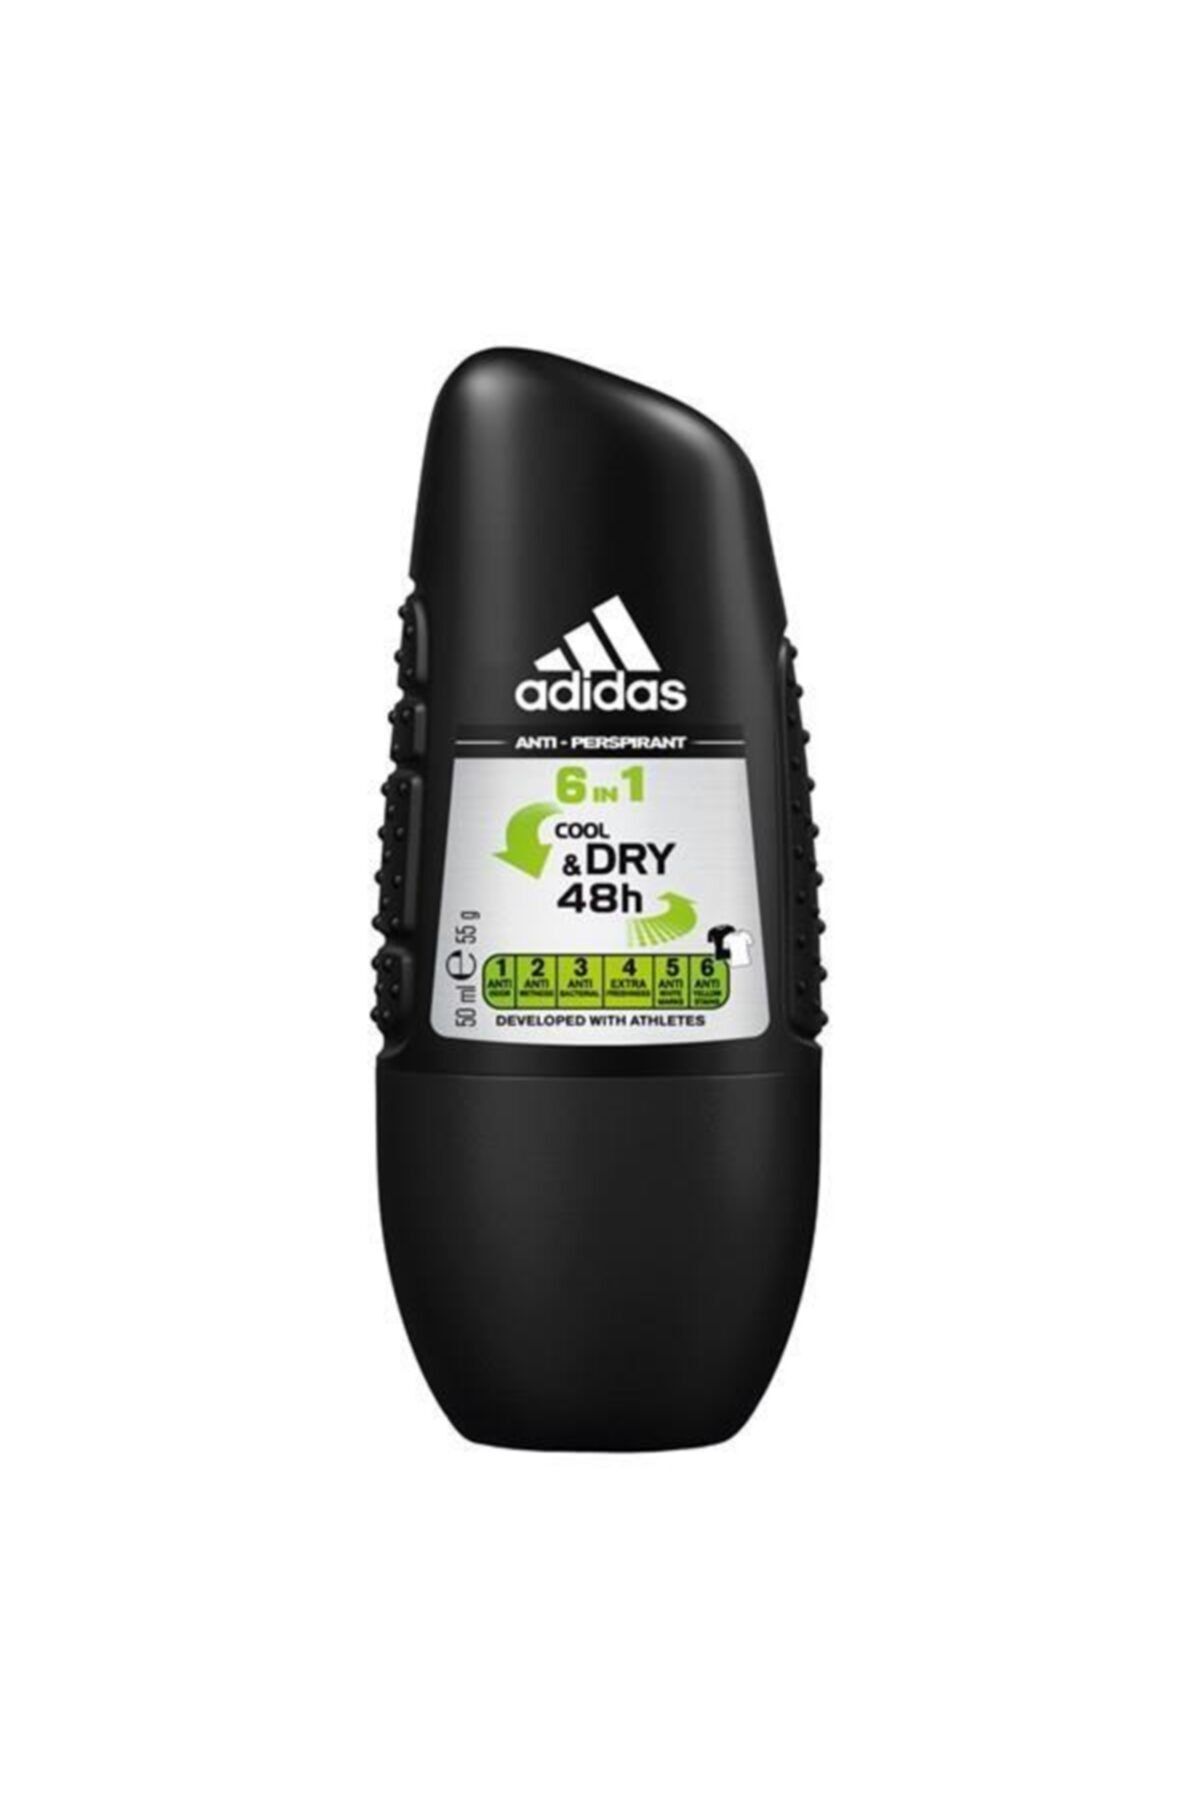 adidas For Men Rollon Cool & Dry 6in1 50 ml